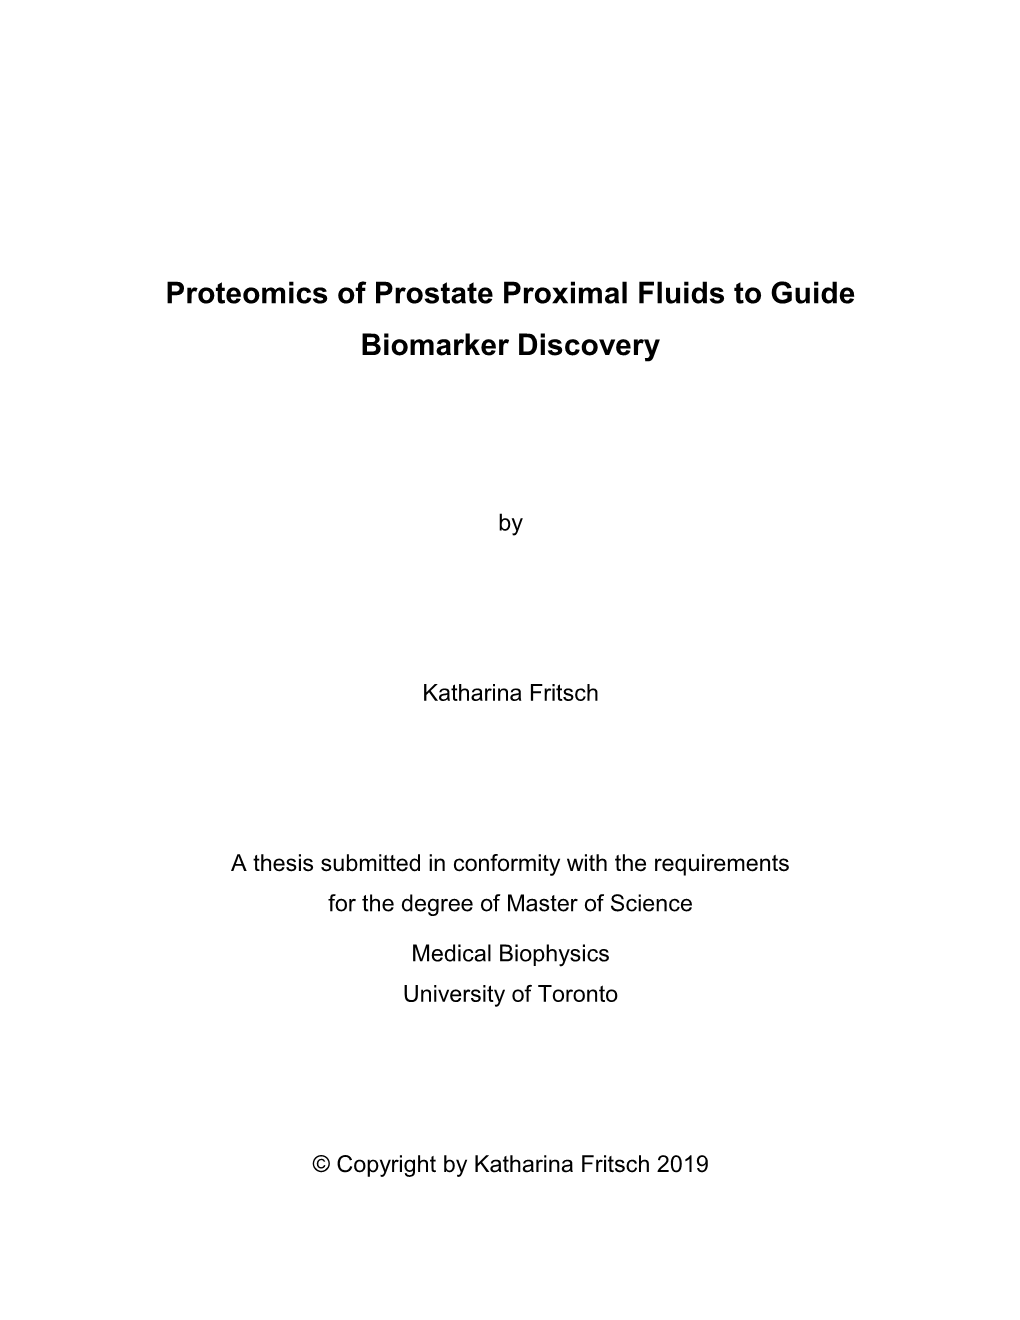 Proteomics of Prostate Proximal Fluids to Guide Biomarker Discovery